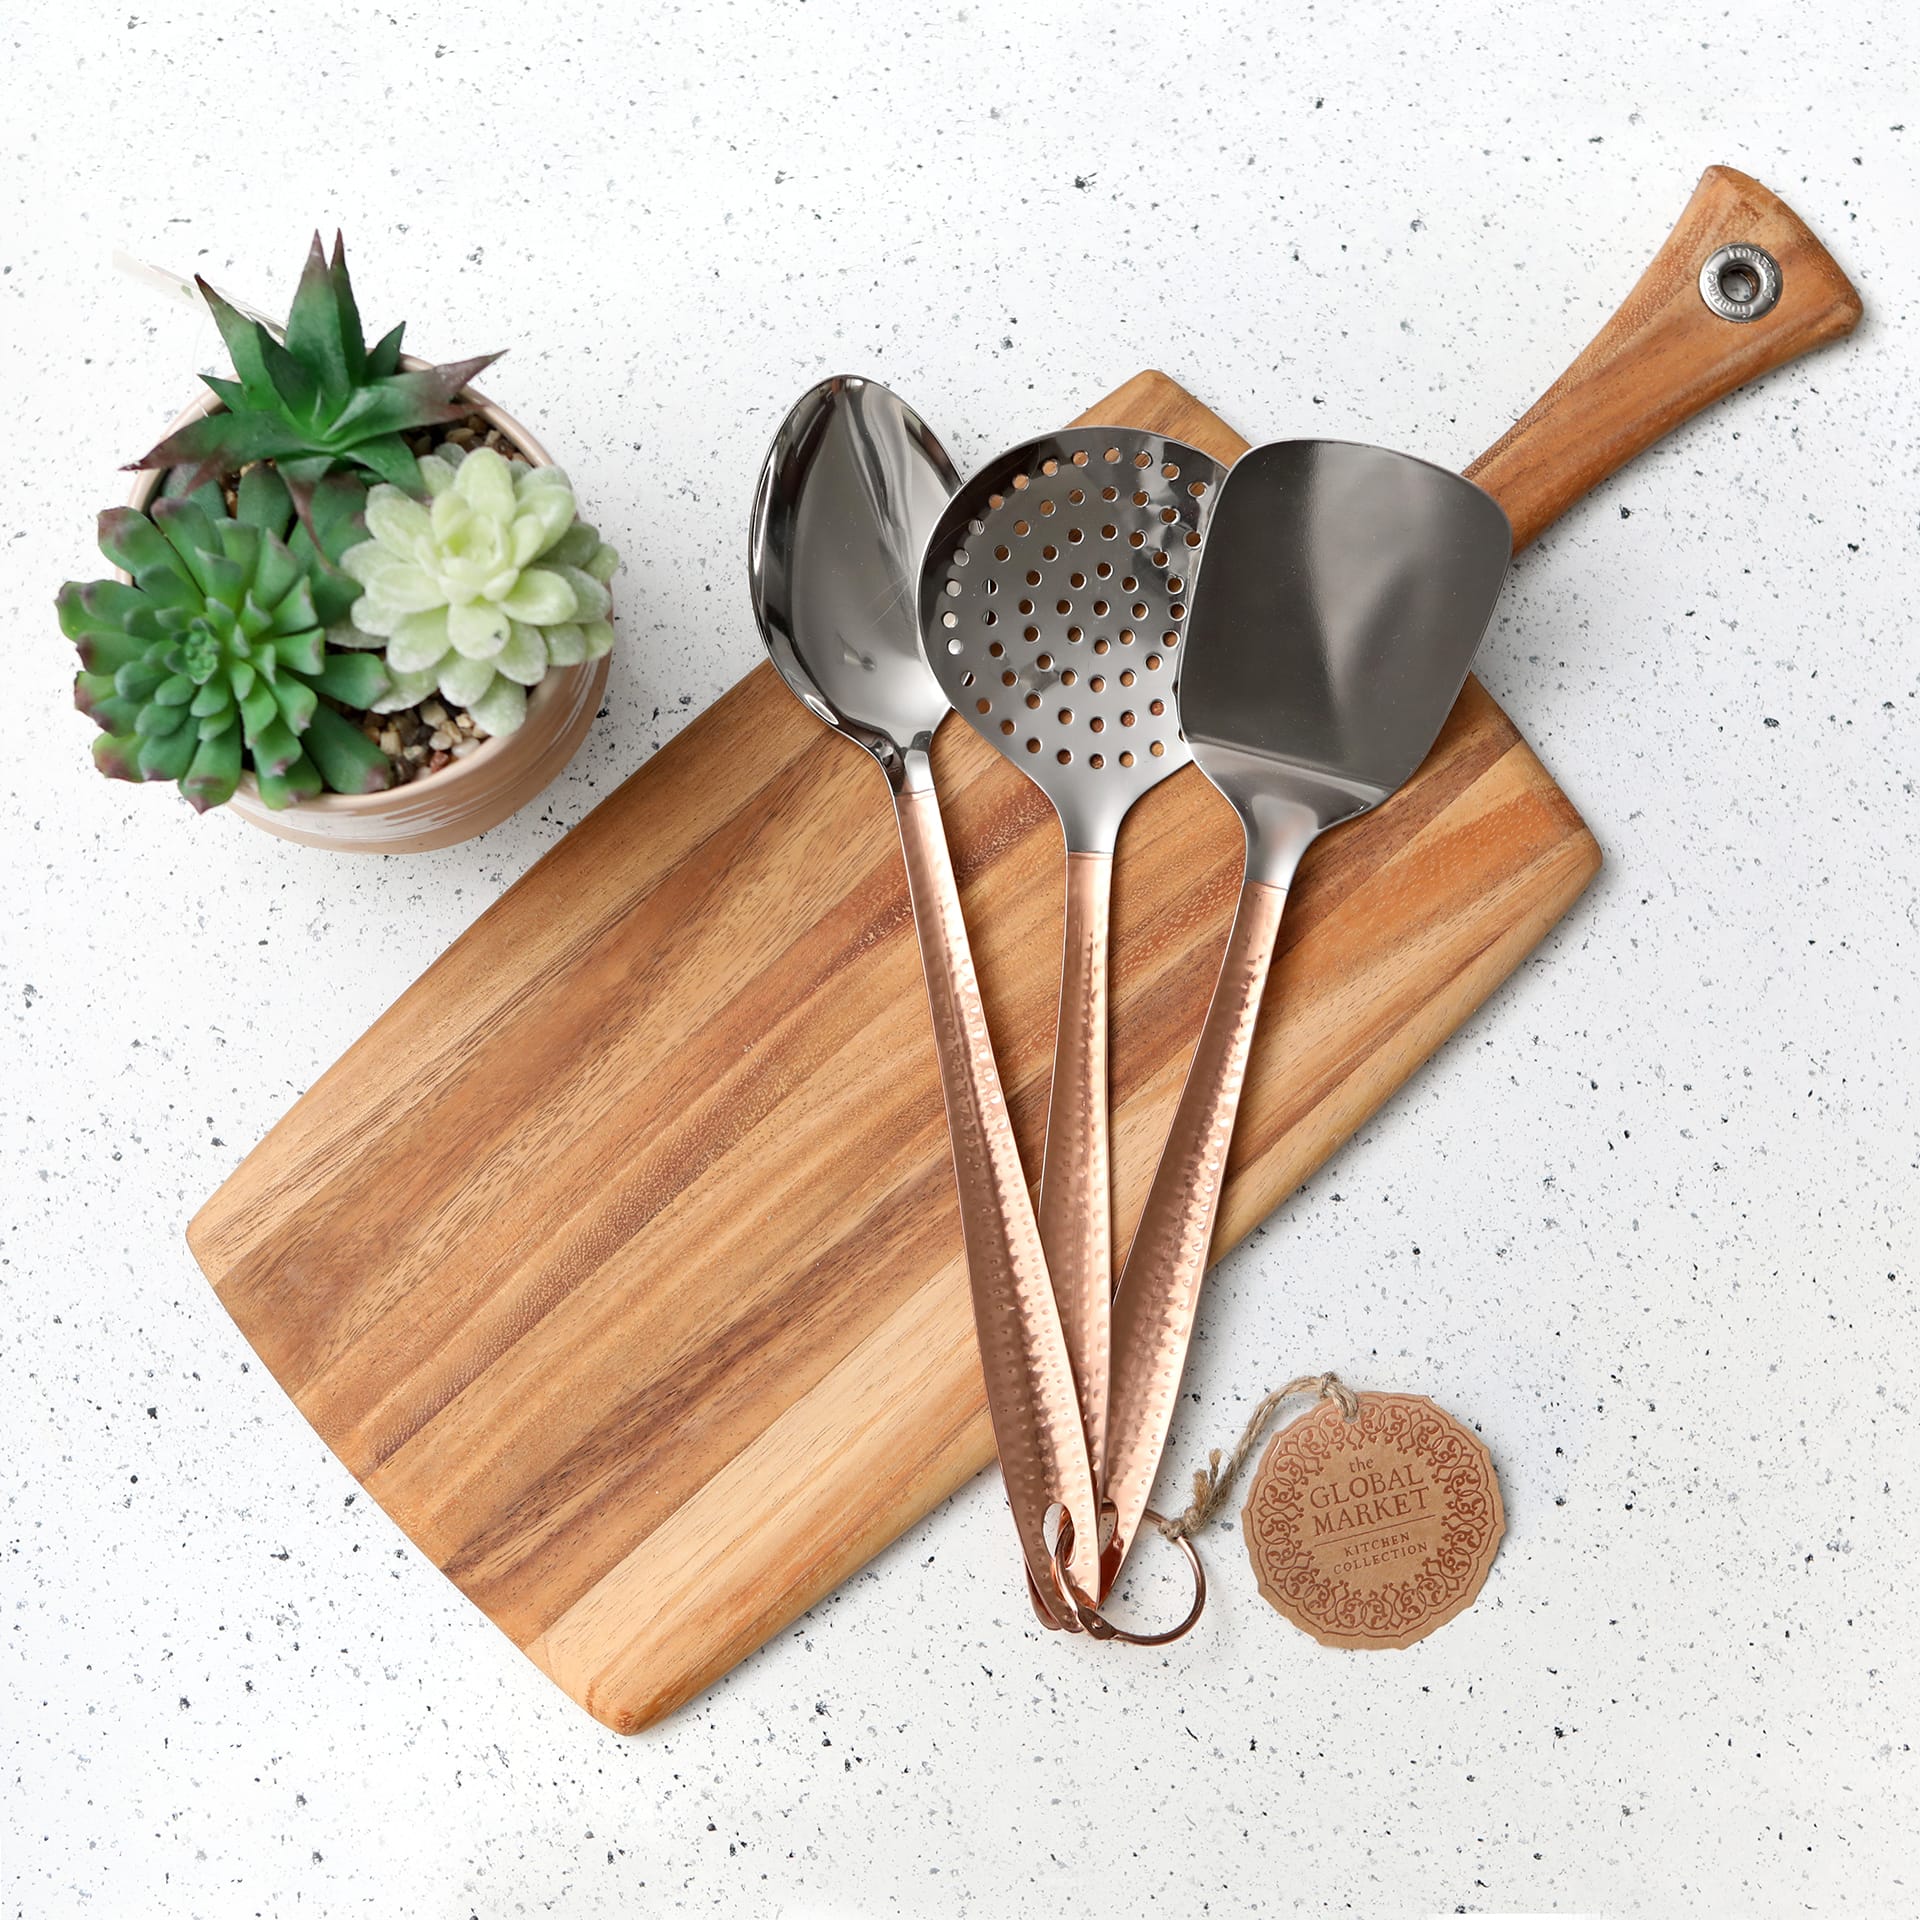 top down photo of kitchen counter with cutting board and kitchen utensils and plant